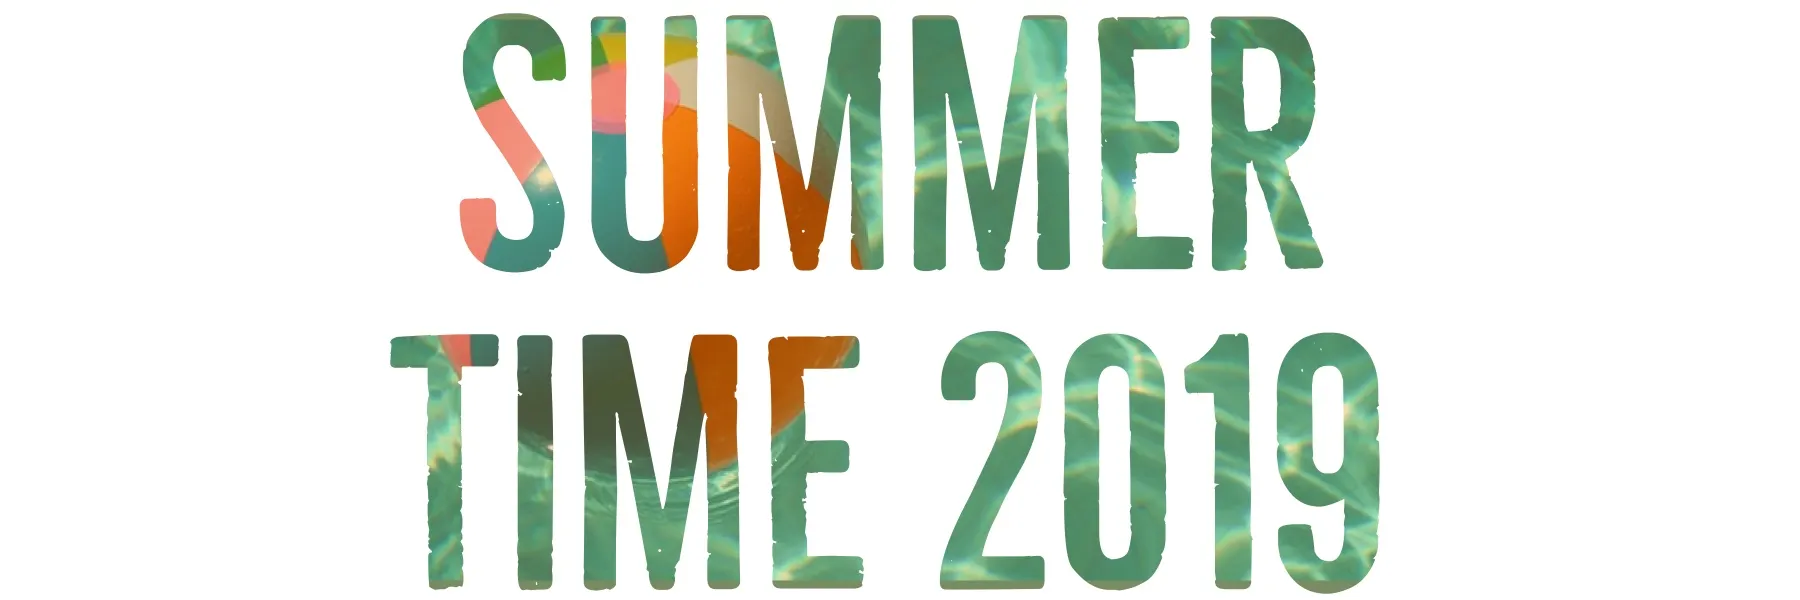 White and Green Summer Time Banner